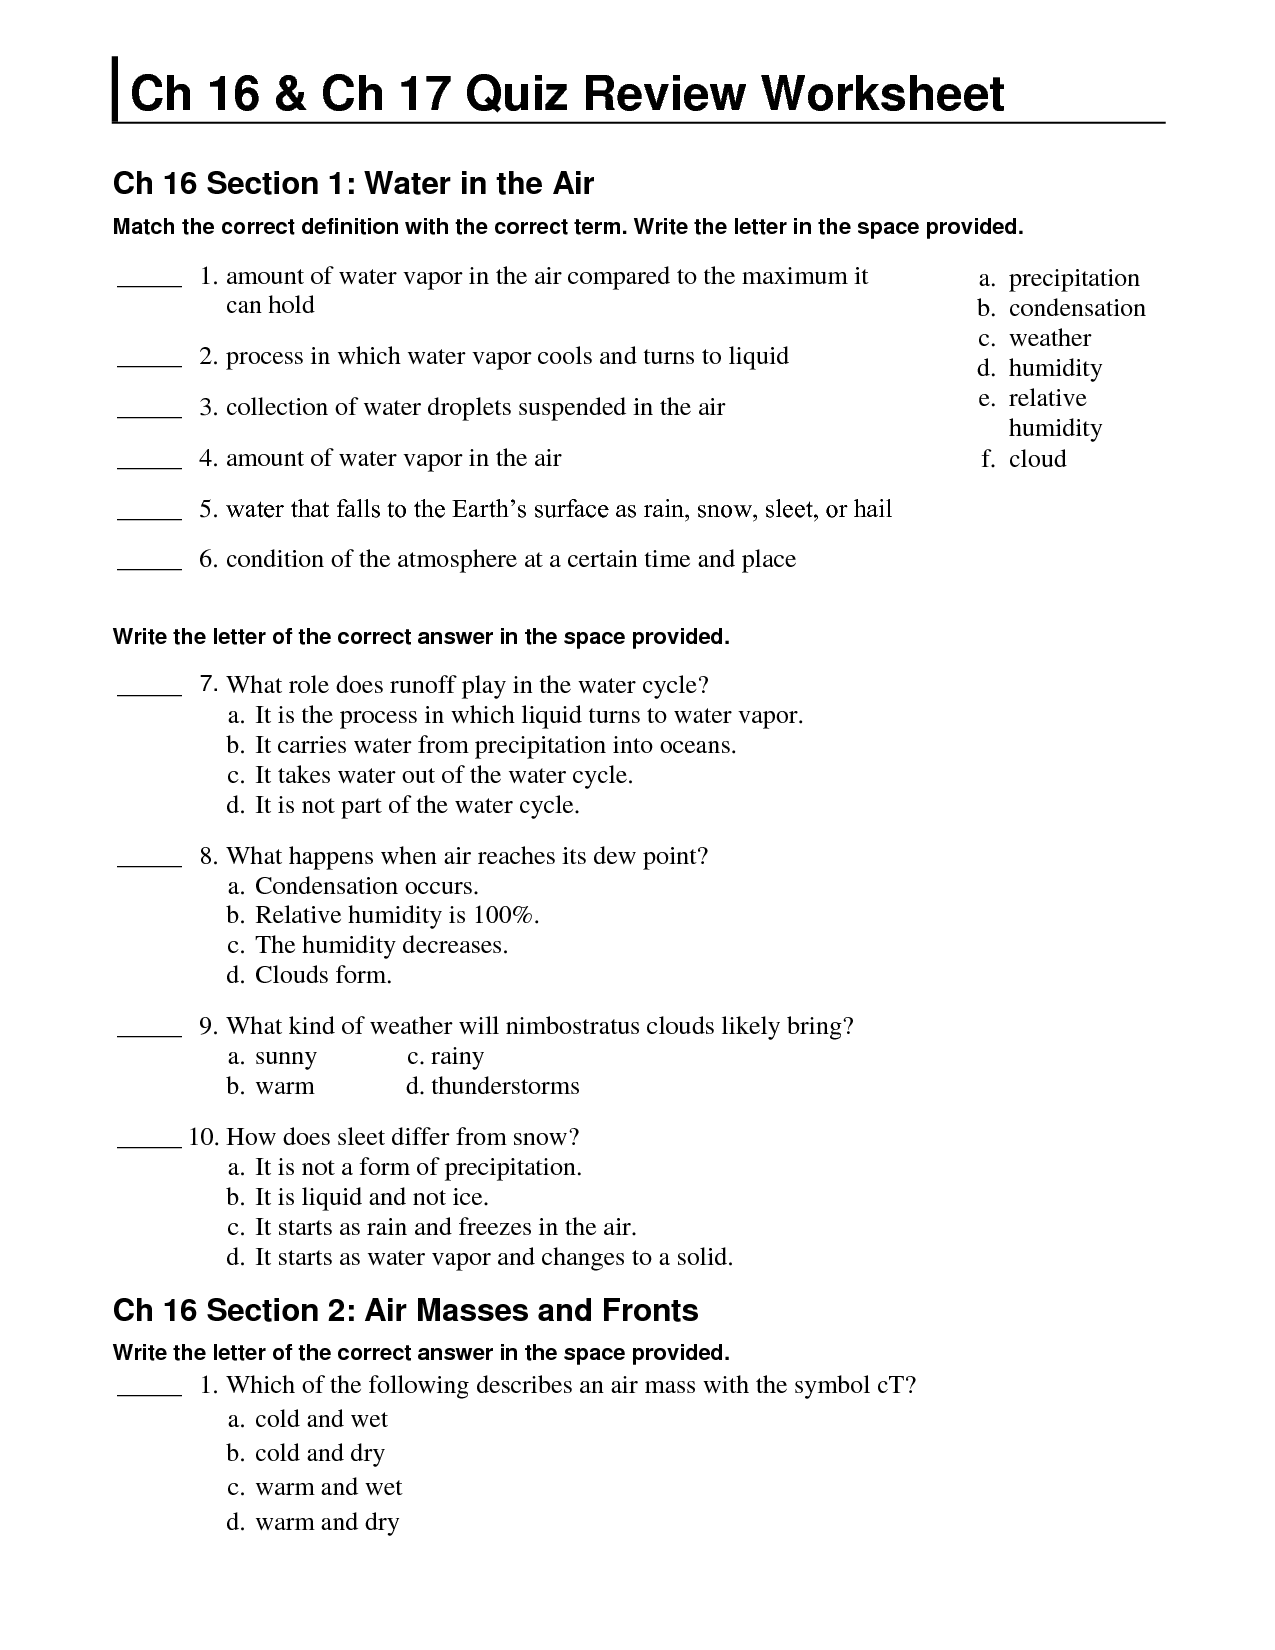 fronts-worksheet-answer-key